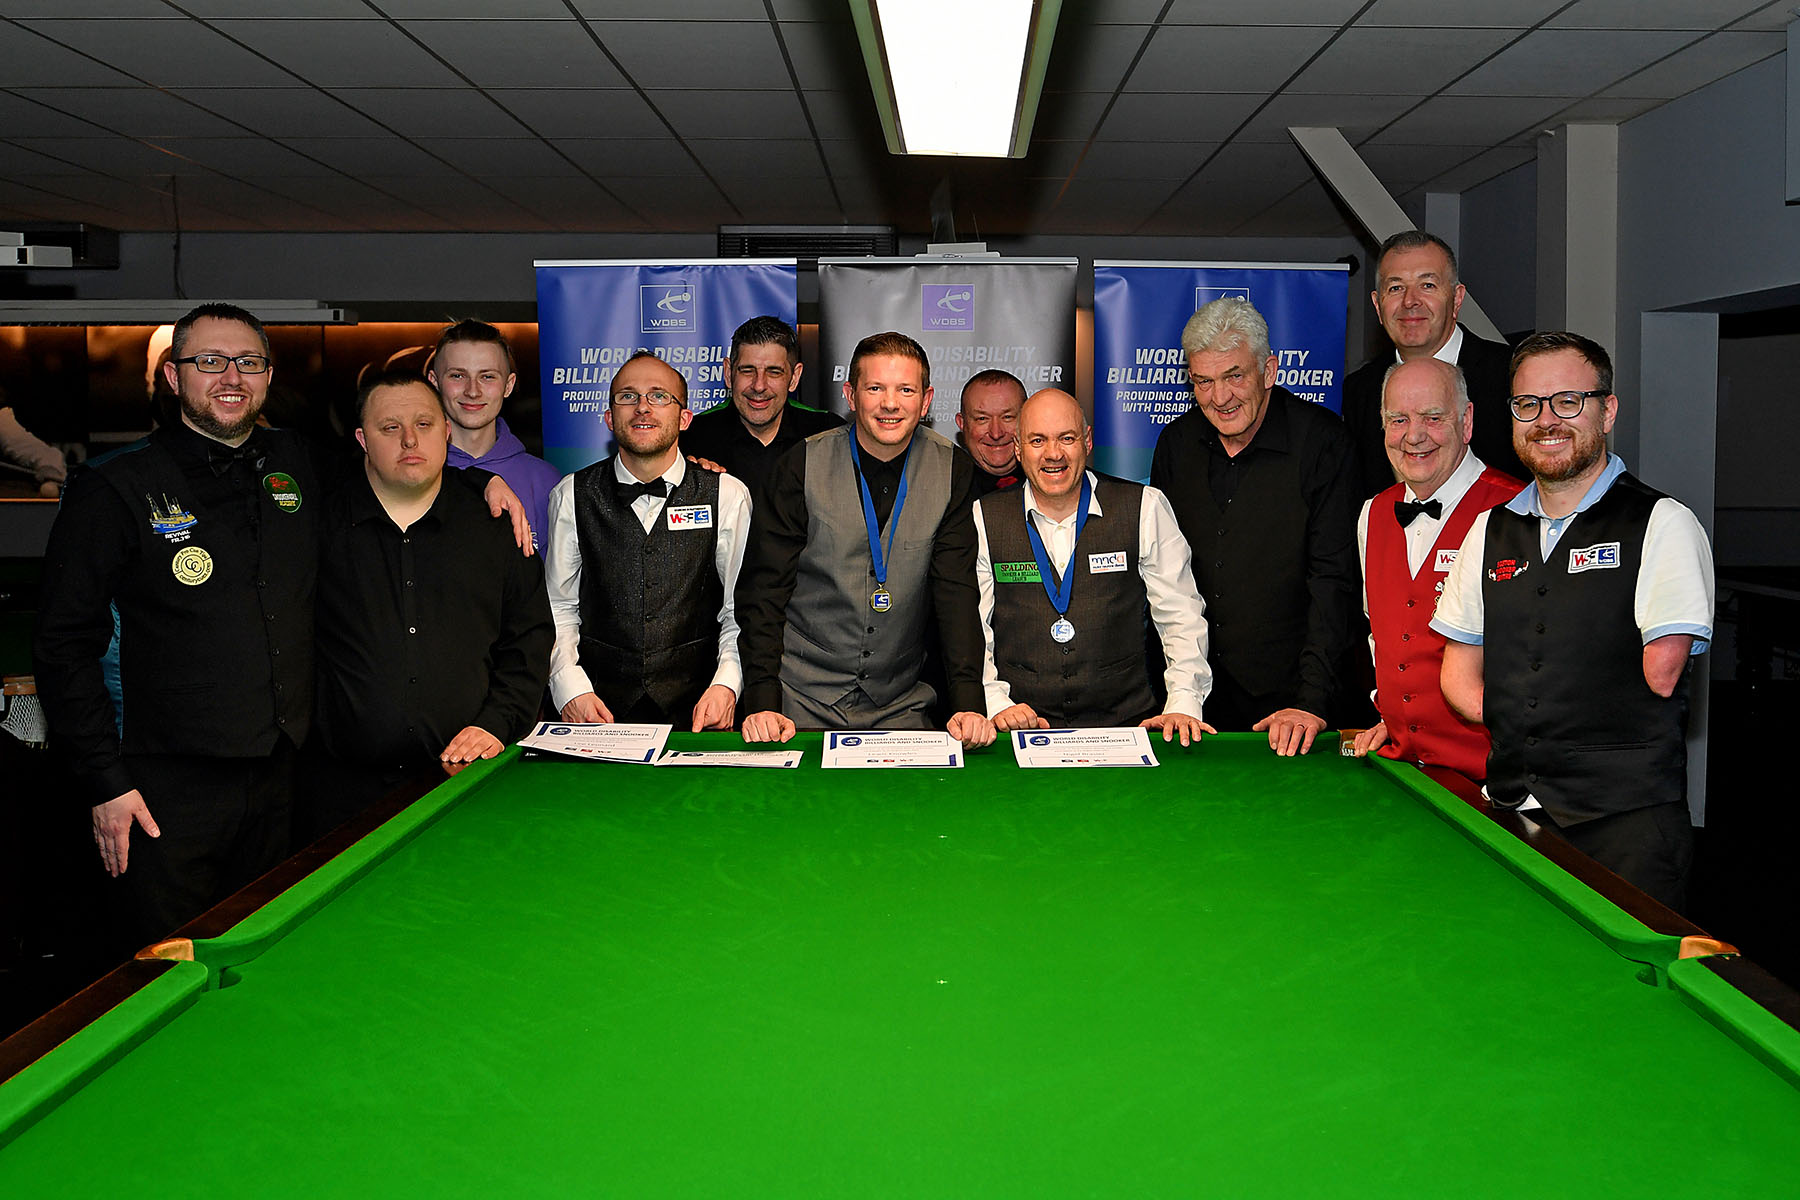 Group of snooker players smiling with medals